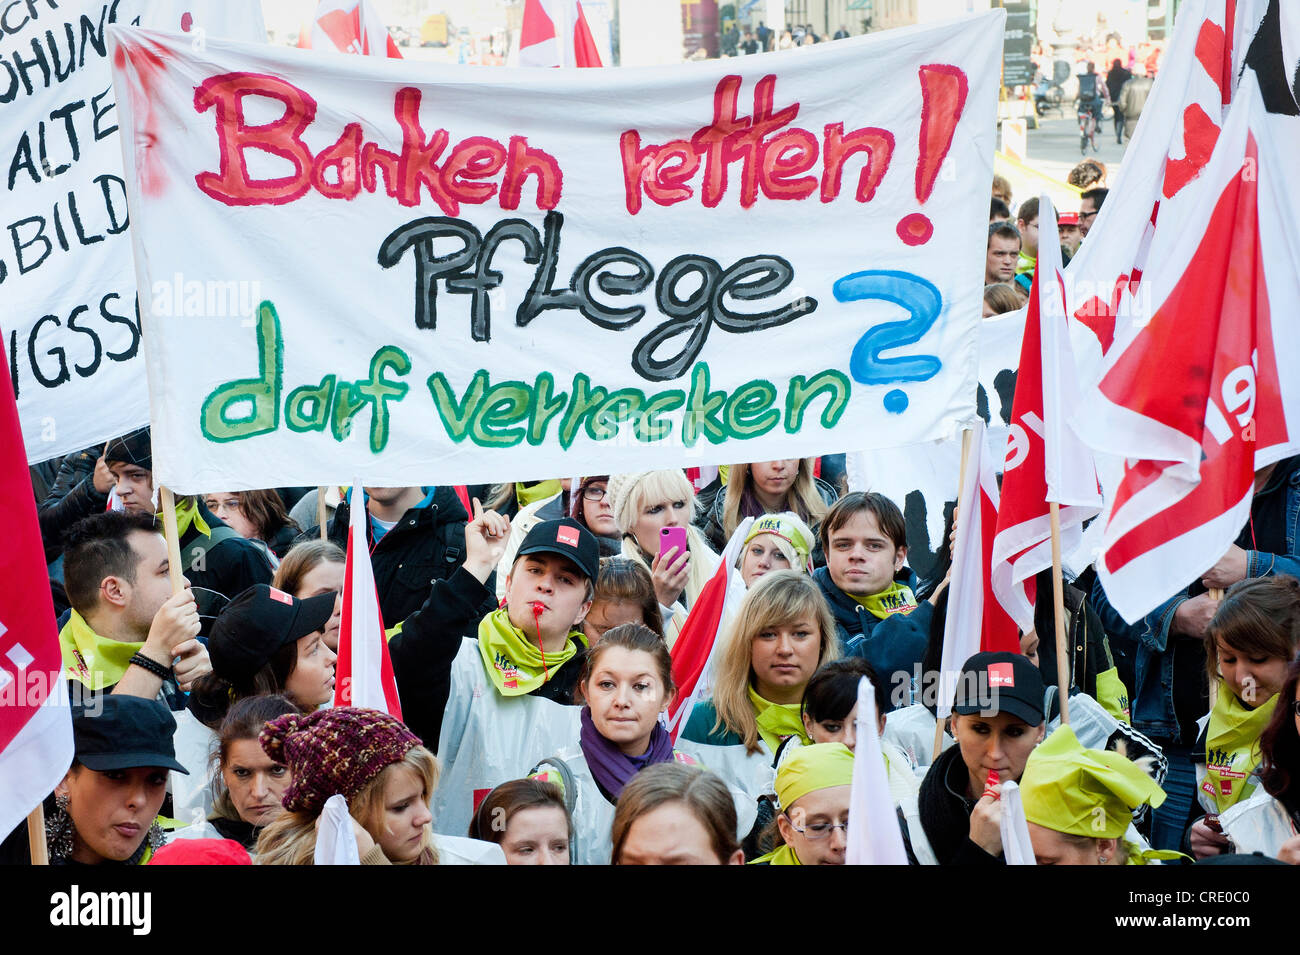 Banner 'Banken retten! Pflege darf verrecken', German for 'Saving the banks. Letting care go to pieces', rally with 1500 Stock Photo